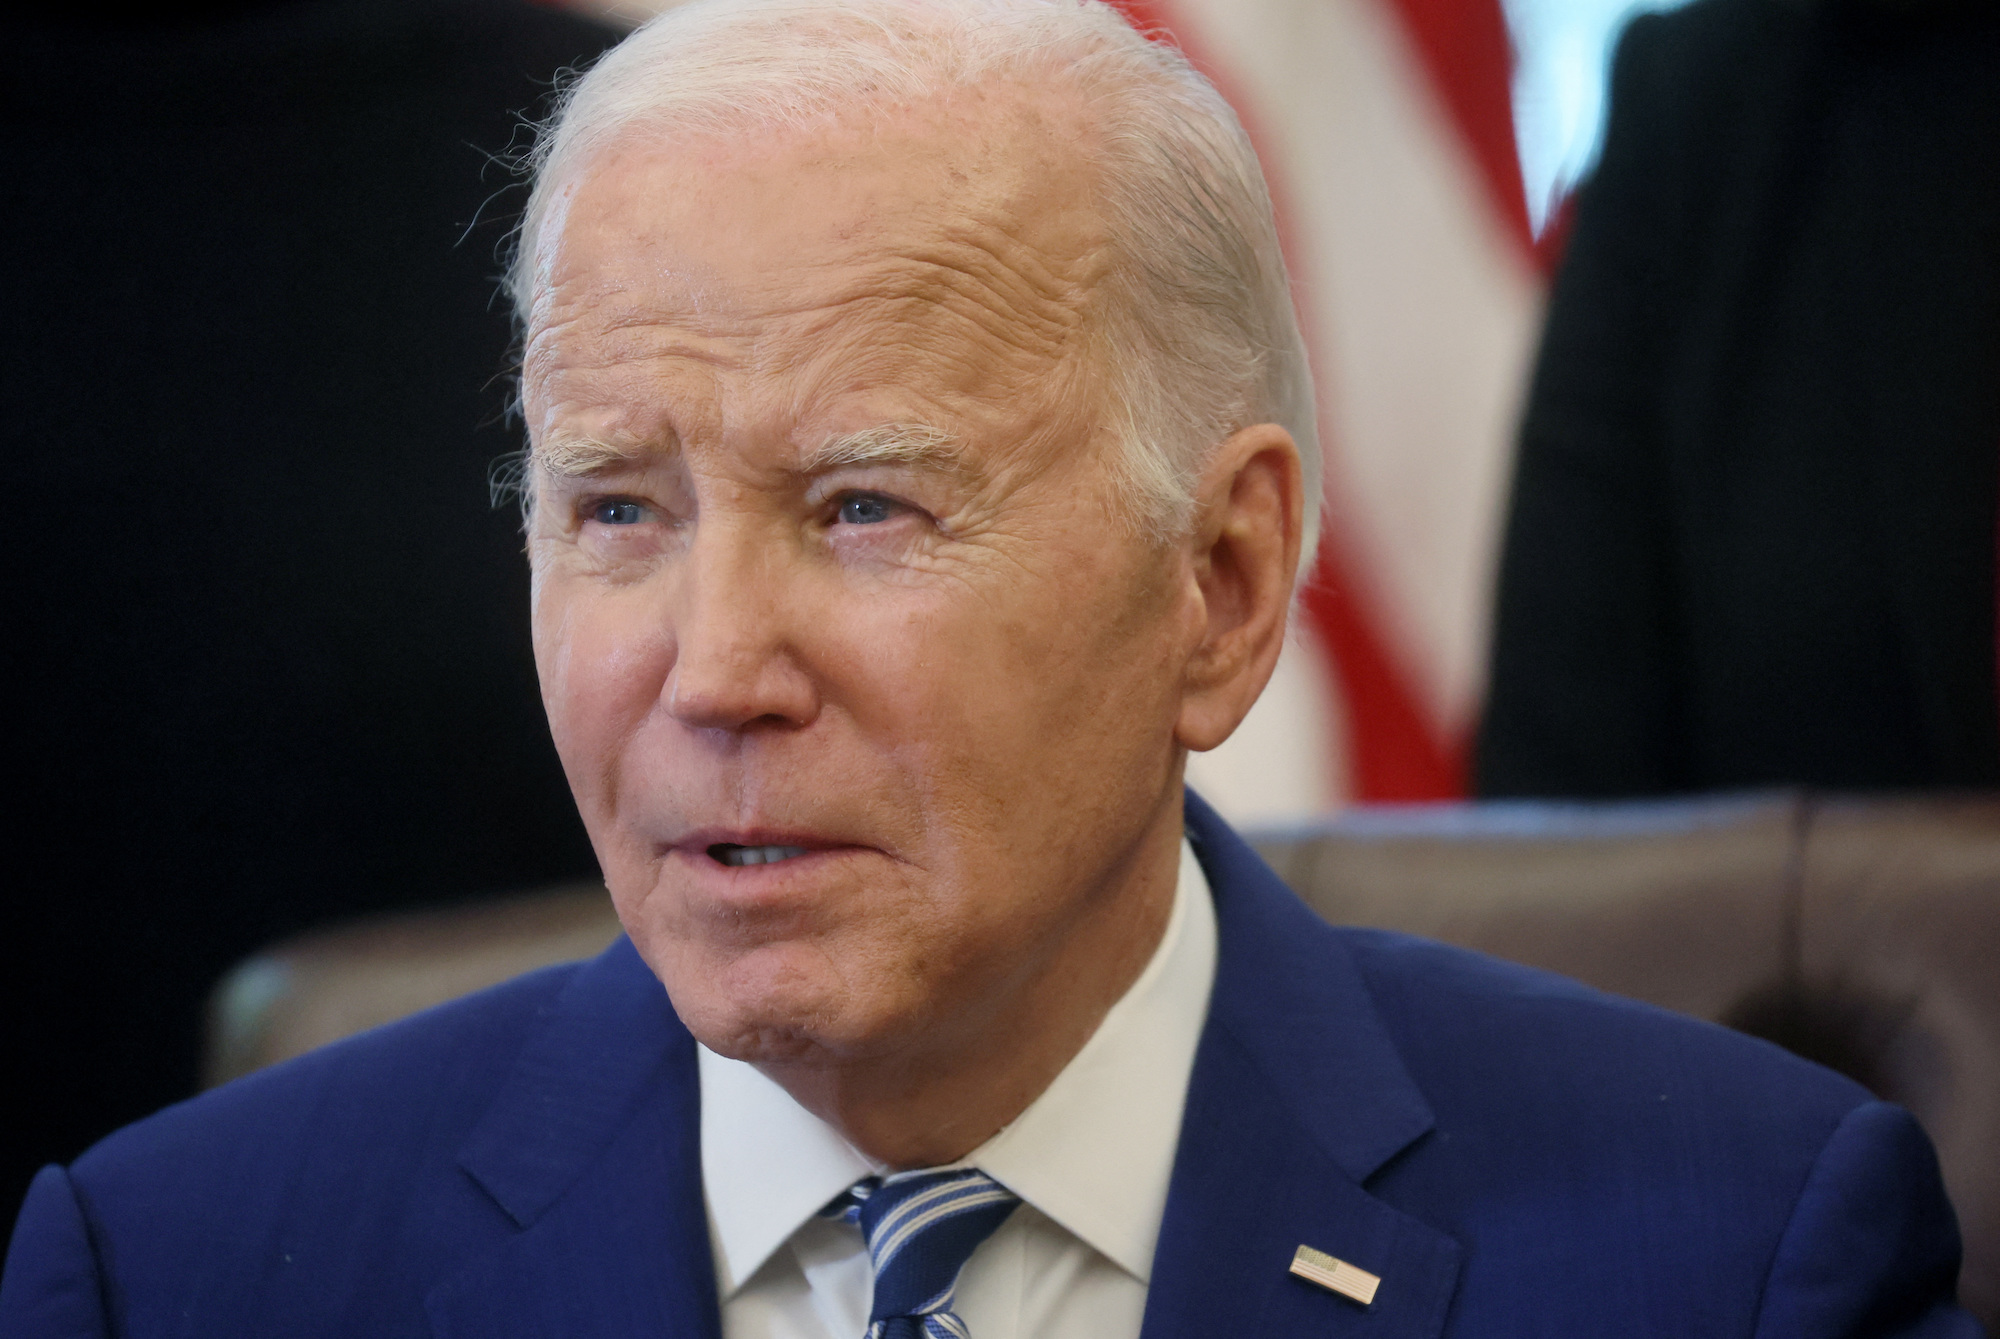 President Joe Biden answers questions from the press at the White House on Monday.